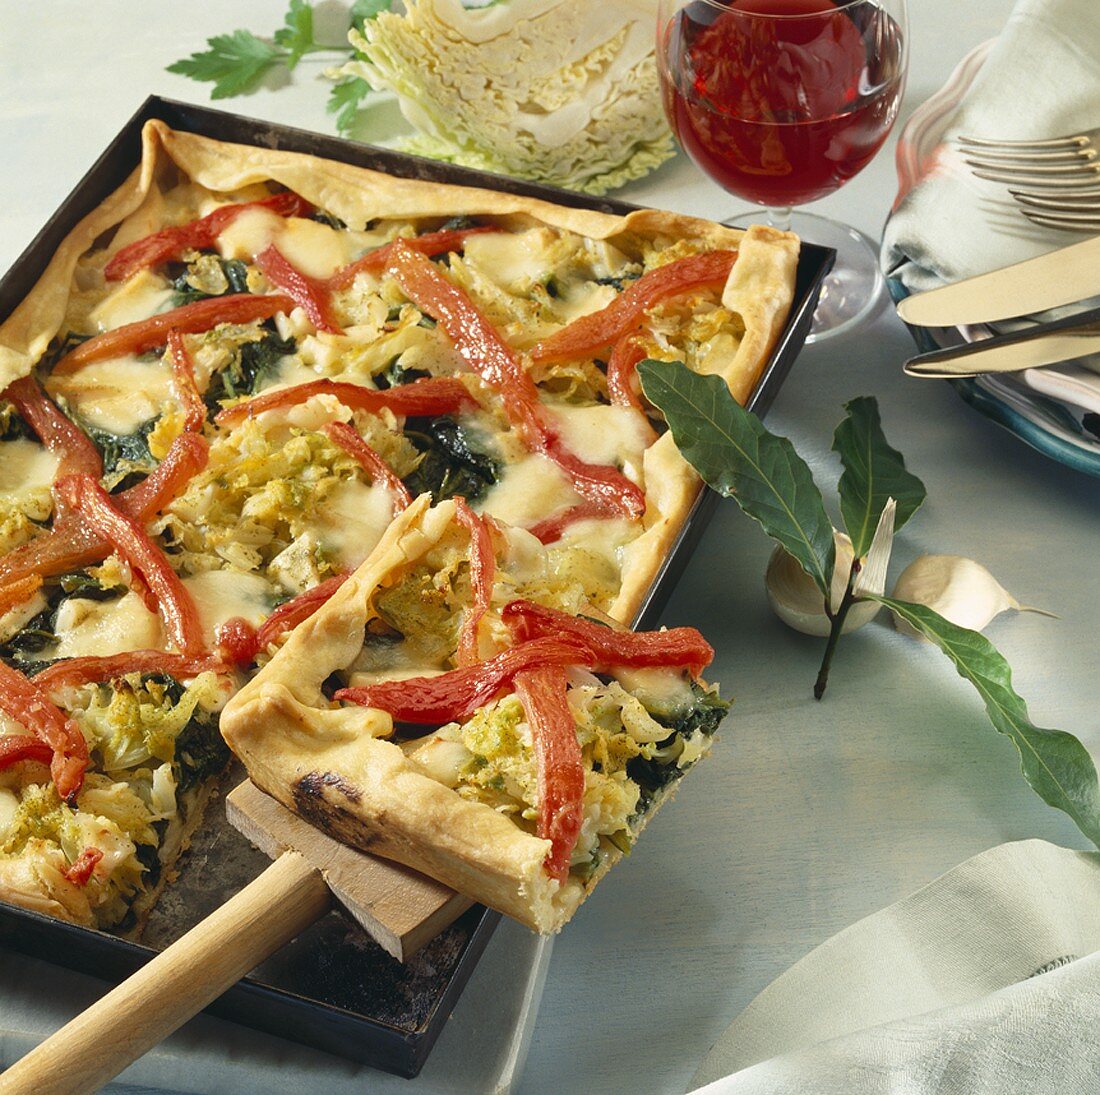 Savoy cabbage and chard tart with red pepper lattice